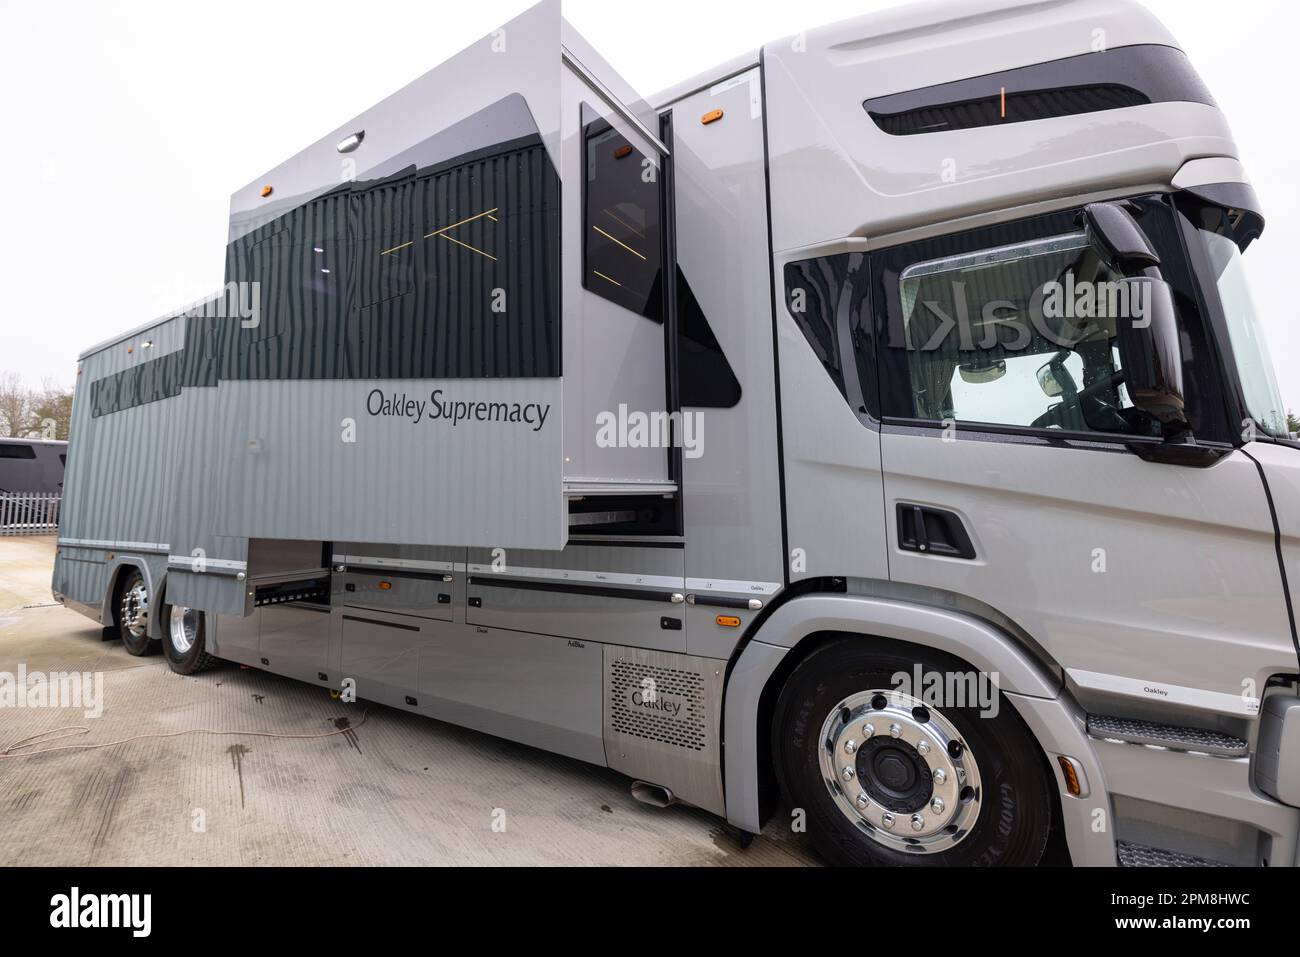 Oakley factory at High Cross in Ware, Hertfordshire, where luxury horse box models Supremacy provides top of the range luxury equestrian accommodation. Stock Photo